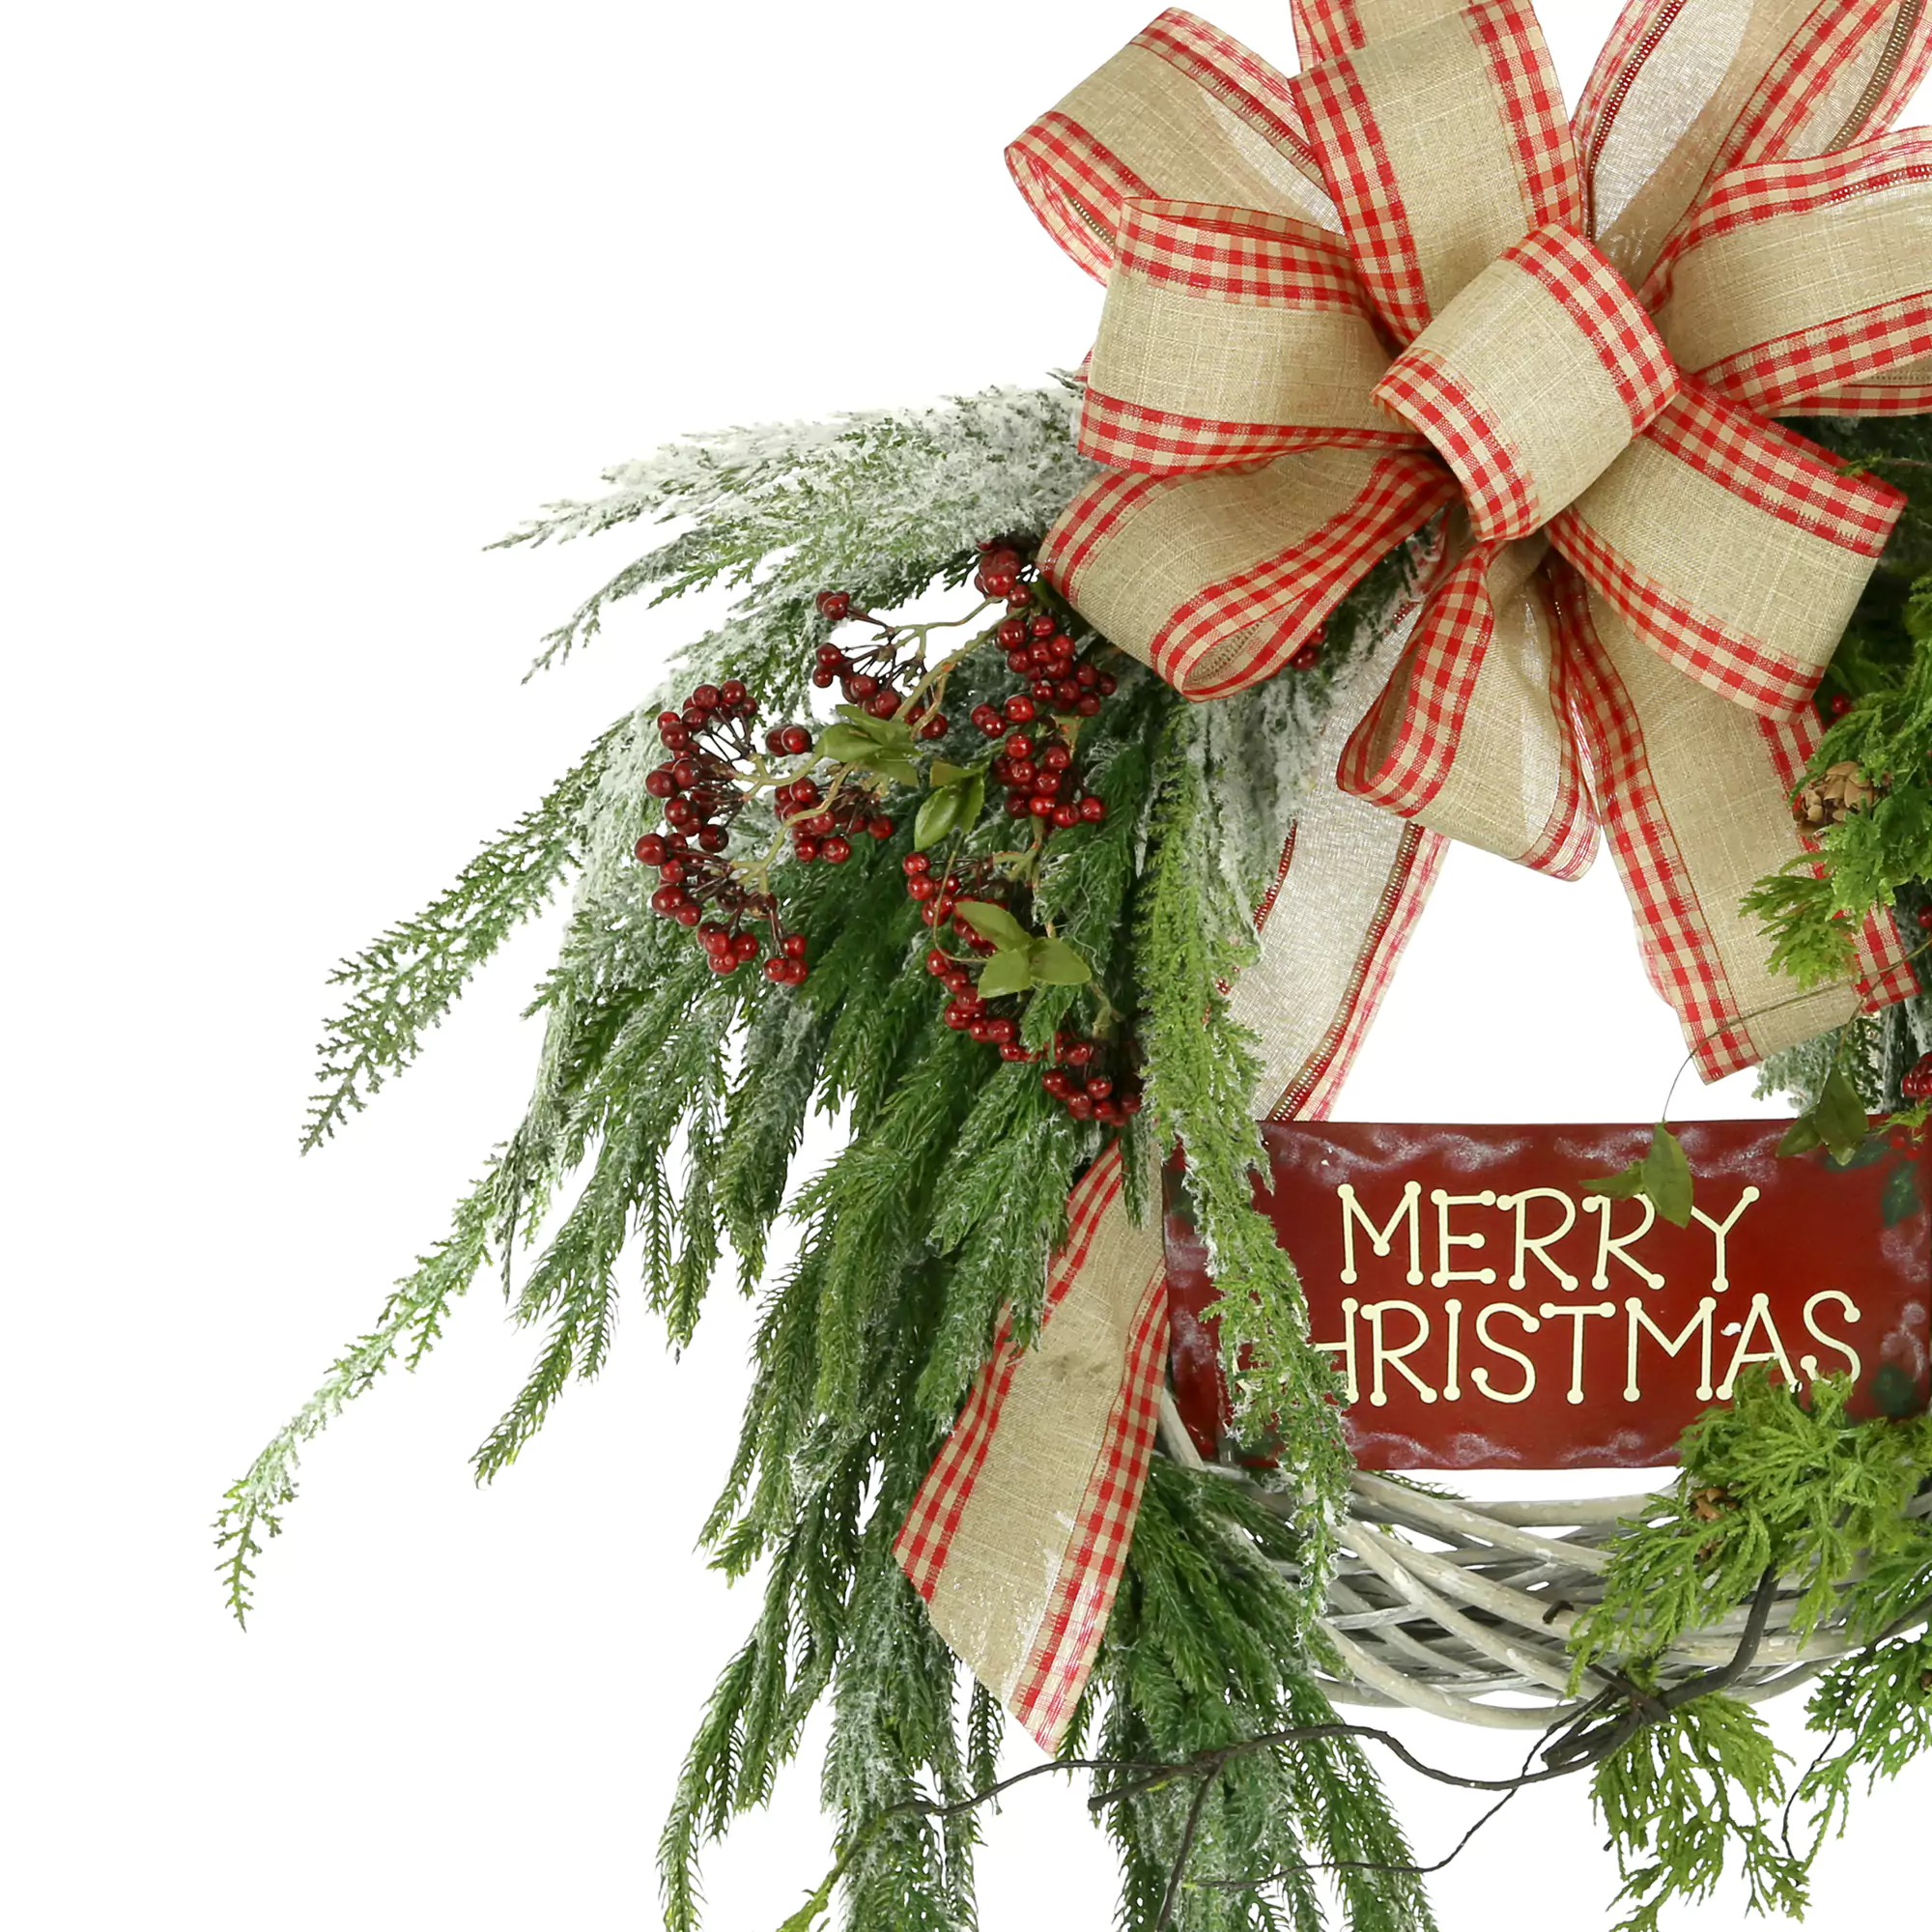 28" Woven Willow Holiday Wreath with "Merry Christmas" Sign